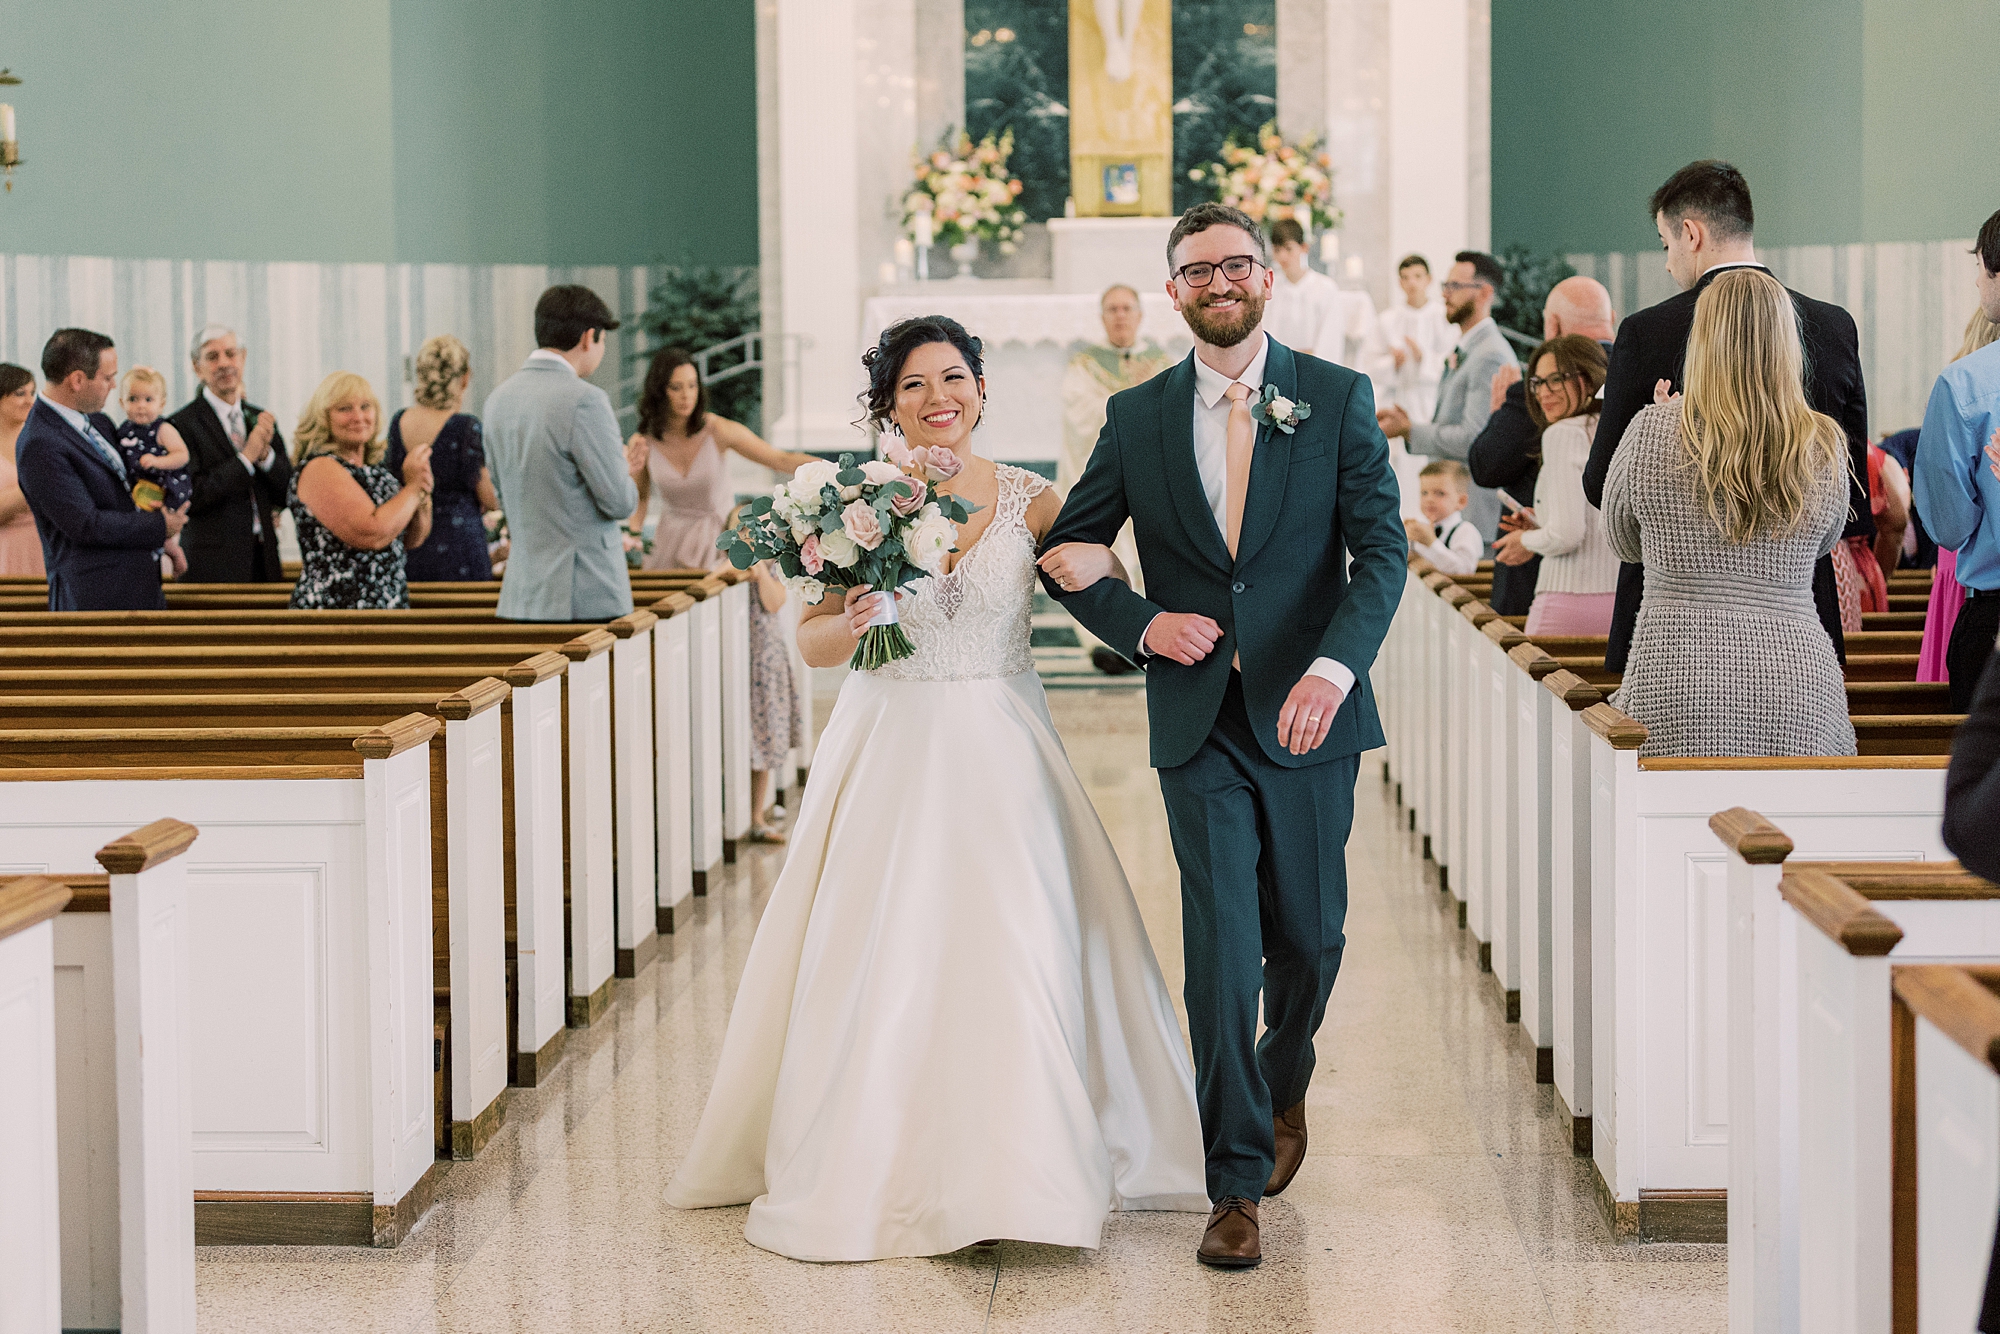 bride and groom walk up aisle after wedding ceremony at St. Dorothy's in Drexel Hall